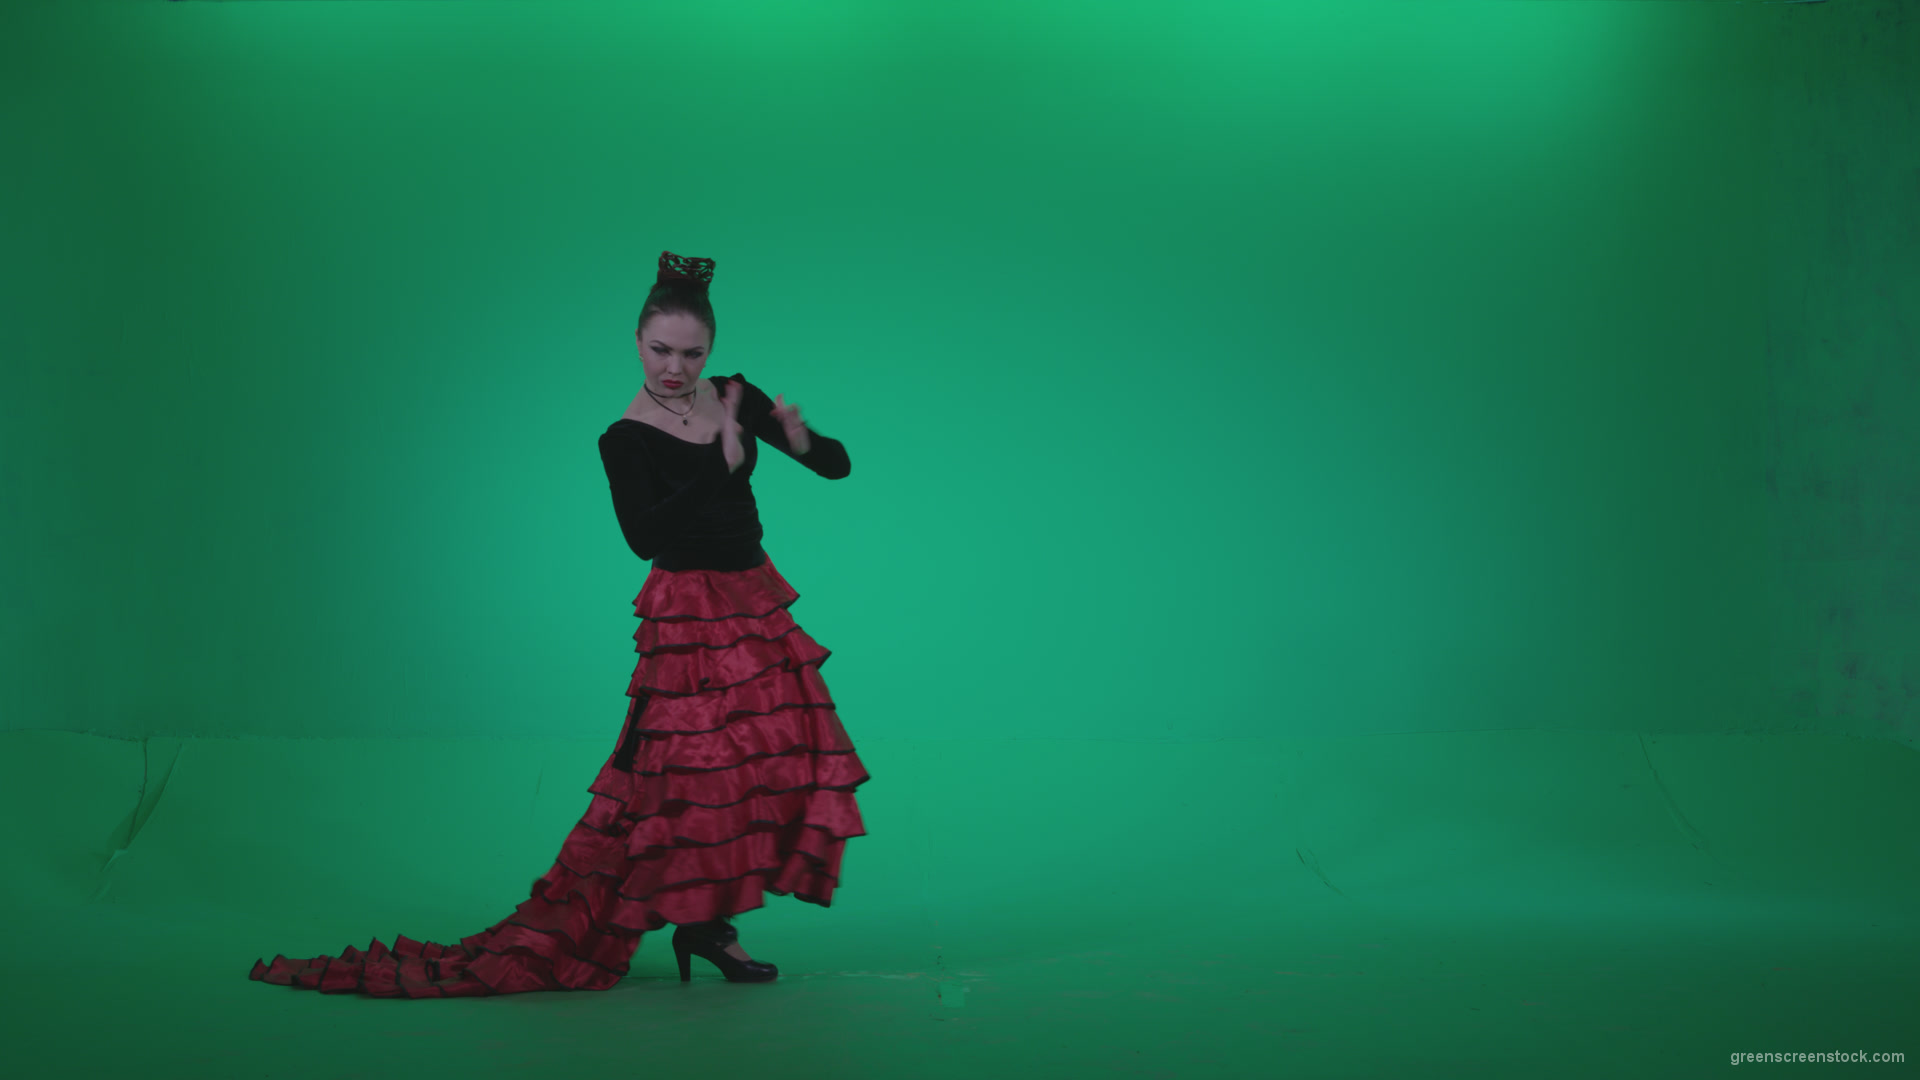 Flamenco-Red-and-Black-Dress-rb11-Green-Screen-Video-Footage_005 Green Screen Stock